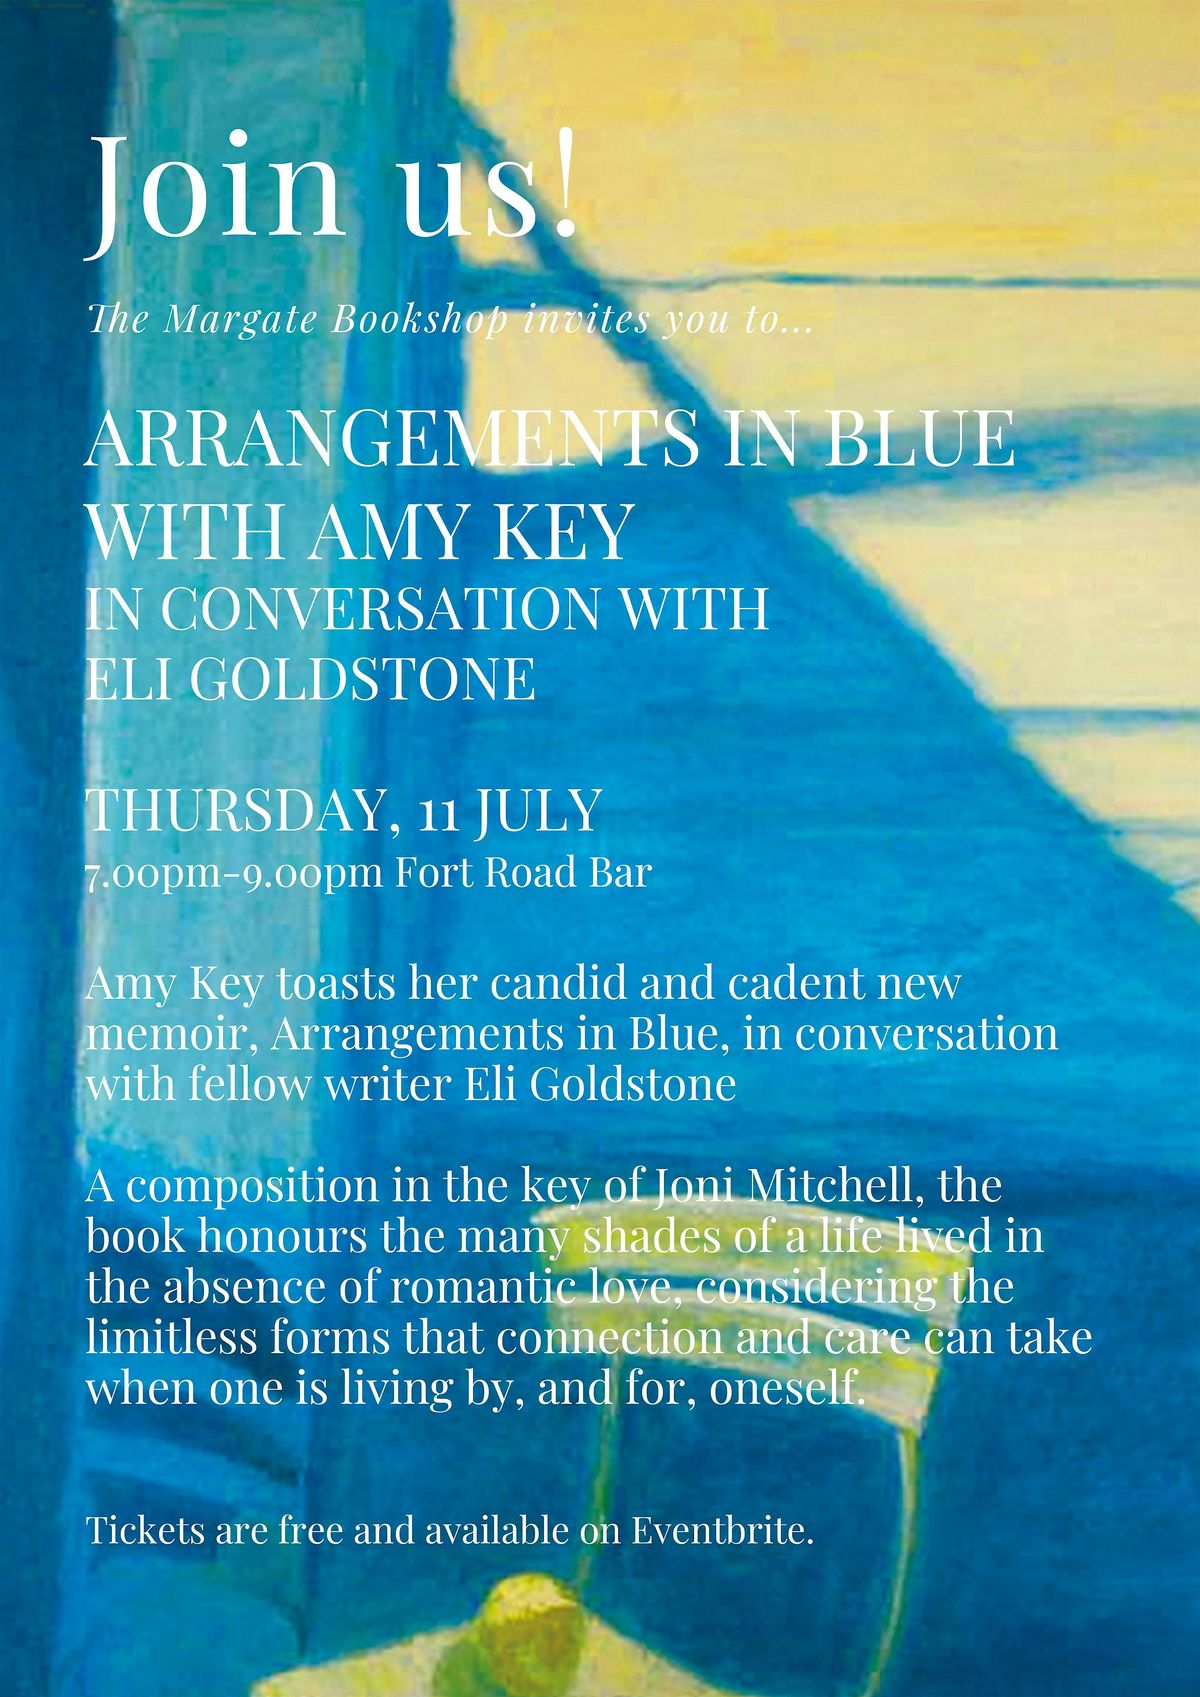 ARRANGEMENTS IN BLUE WITH AMY KEY